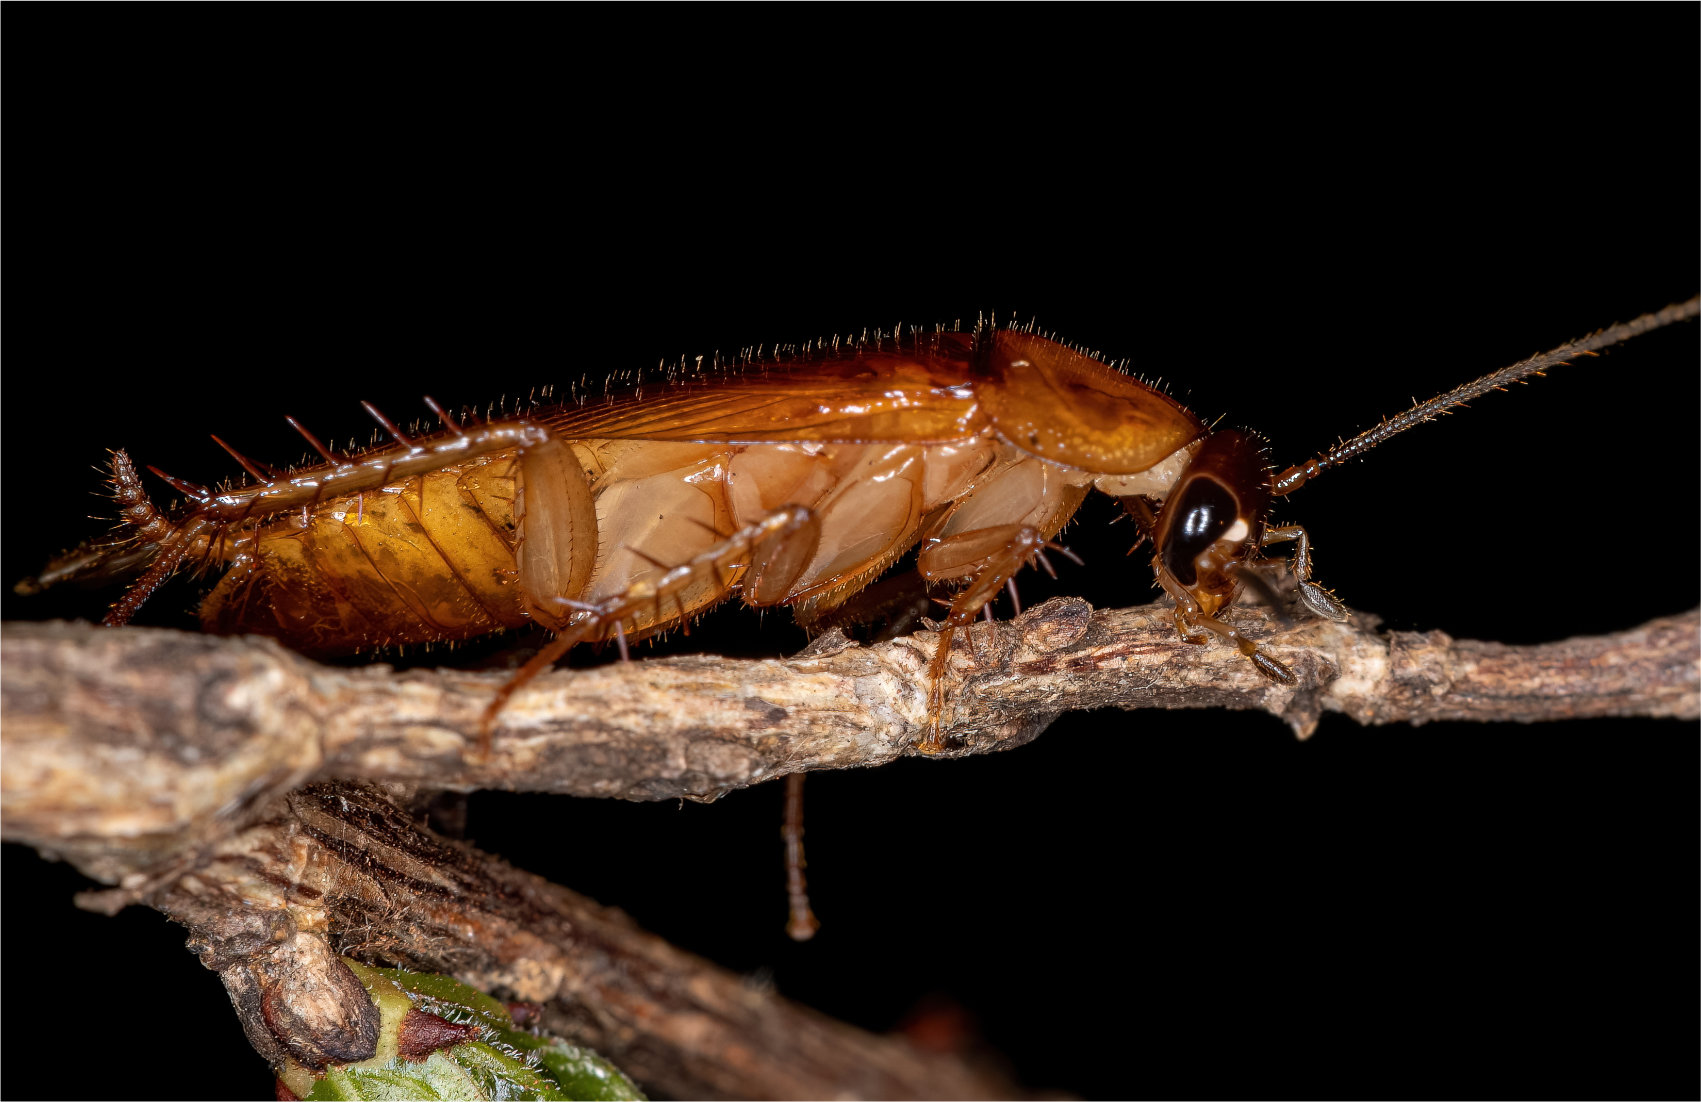 A very close up of a cockroach showing roach hairs